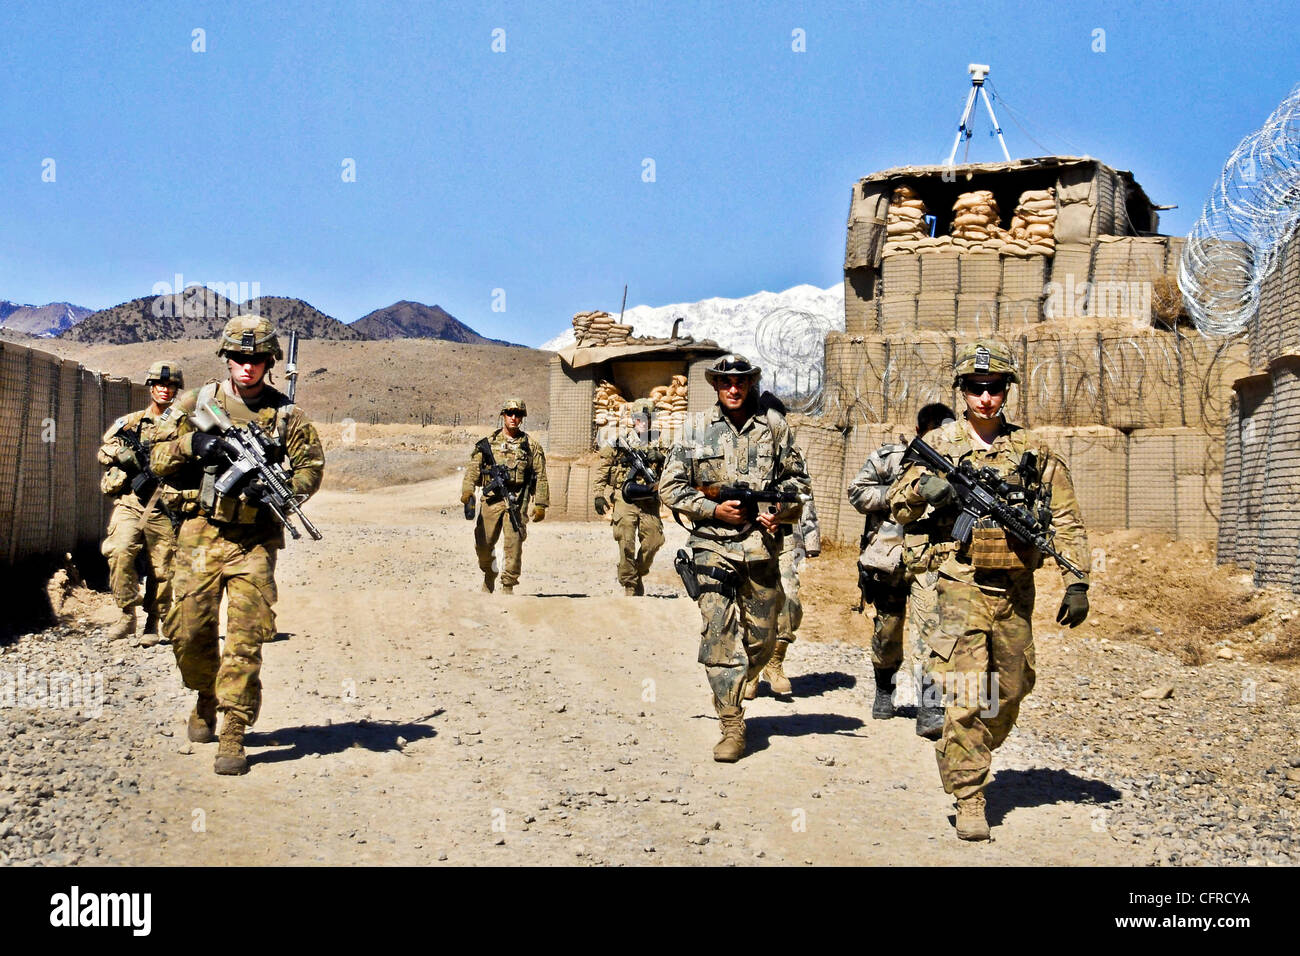 US Army soldiers conduct security patrols near the Pakistan border at Combat Outpost Dand Patan February 29, 2012 in Paktya province, Afghanistan. Stock Photo